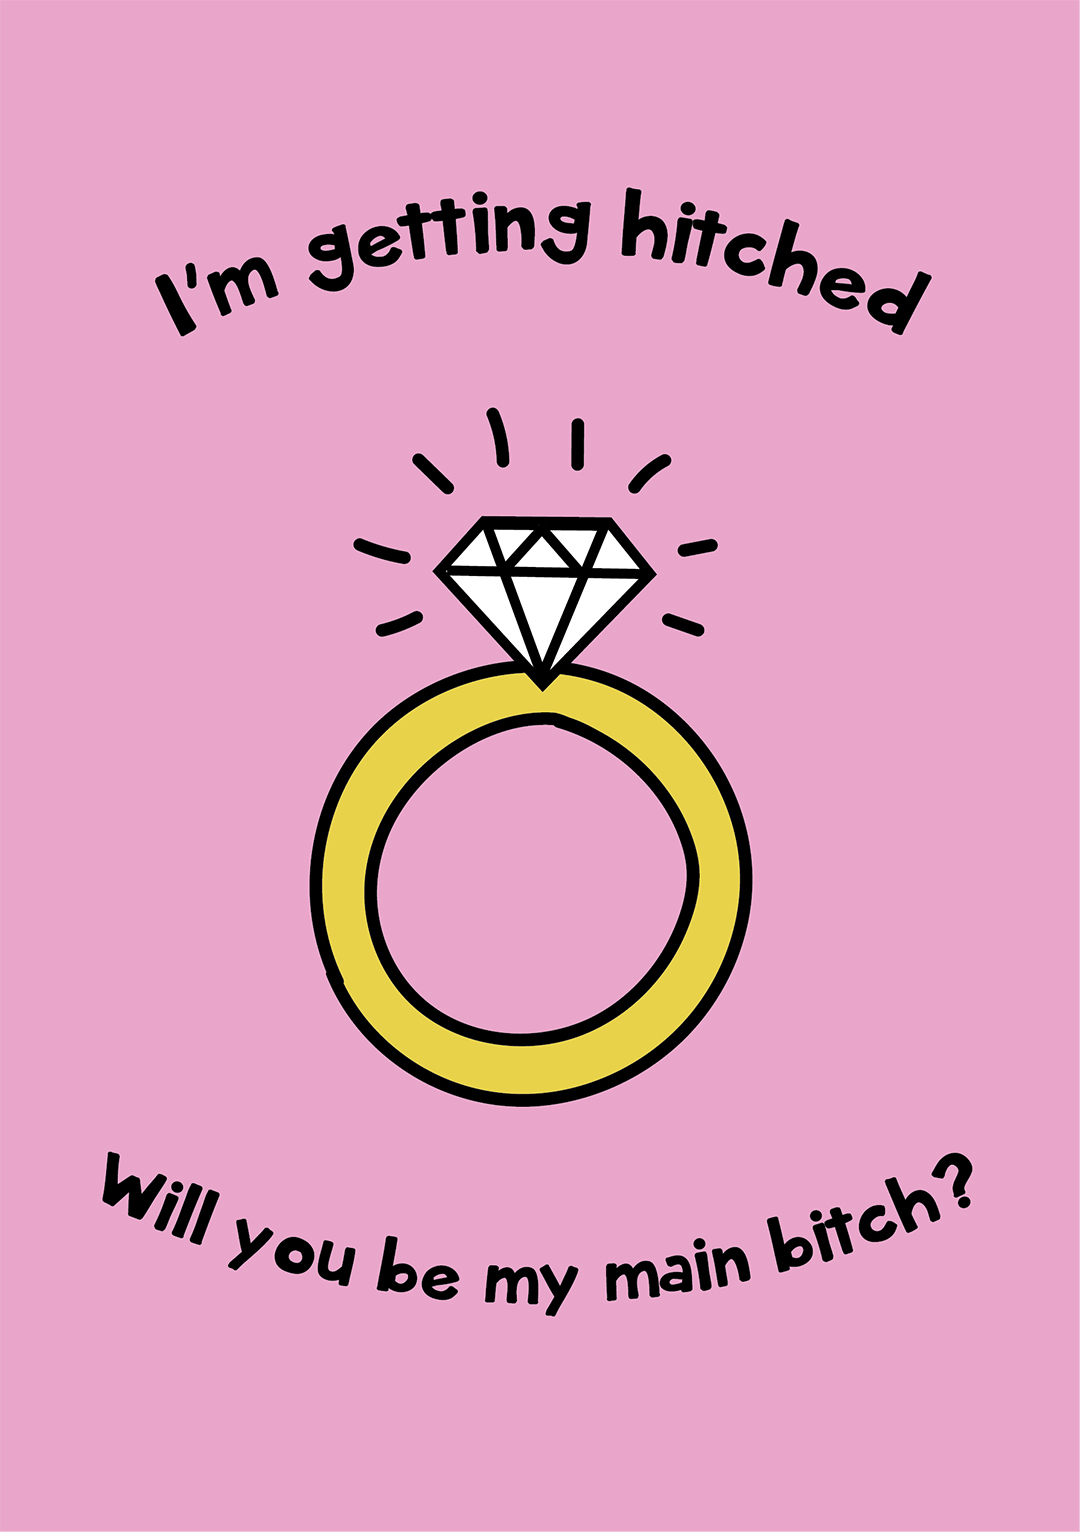 I'm Getting Hitched, Will You Be My Main Bitch?